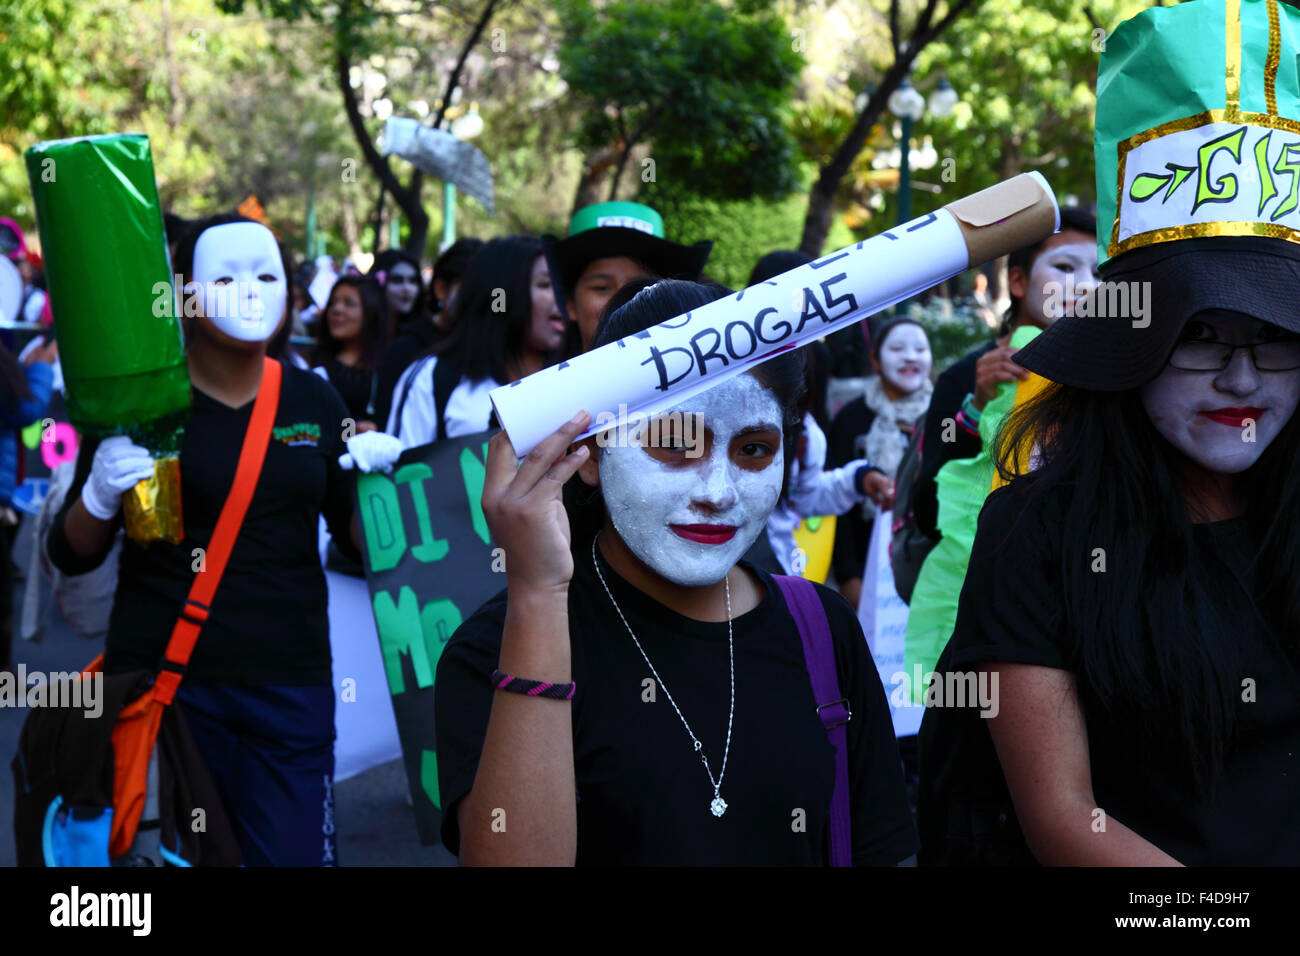 La Paz, Bolivia, 16th October 2015. A female student with her face painted white carries a giant cigarette with the words 'Say No to Drugs' on it during a march through La Paz city centre warning of the dangers of drug use. The demonstration is organised every year by the police together with schools and colleges to educate and raise awareness about drugs and their dangers. Credit: James Brunker / Alamy Live News Stock Photo